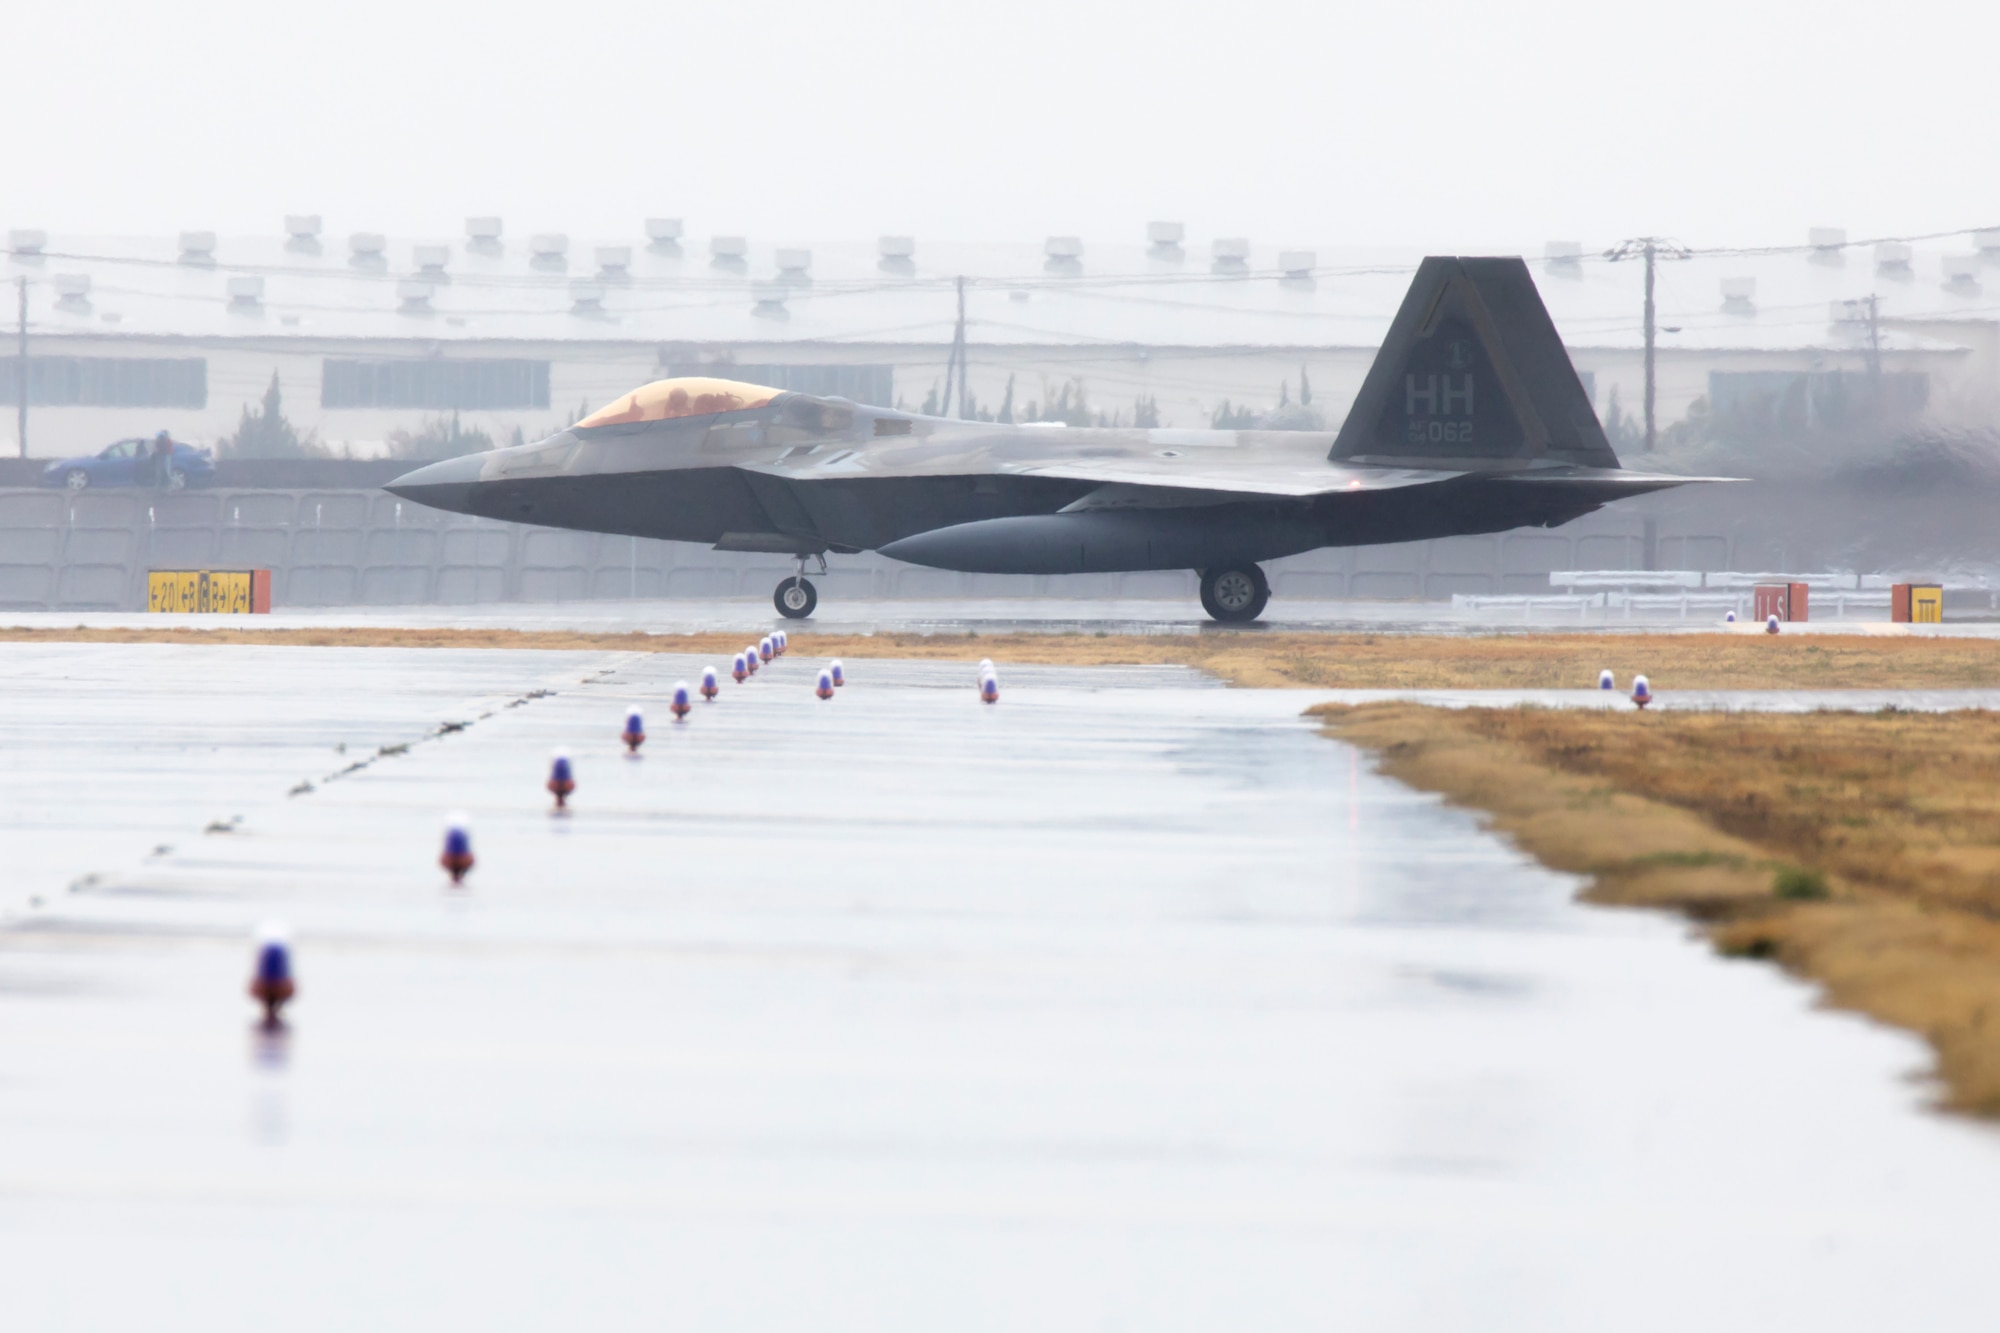 A U.S. Air Force F-22 Raptor with the 199th Fighter Squadron, taxis at Marine Corps Air Station Iwakuni Japan, March 12, 2021. Airmen with the 199th Fighter Squadron and the 19th Fighter Squadron, based out of Joint Base Pearl Harbor-Hickam, Hawaii, deployed to MCAS Iwakuni to conduct local area training with U.S. Marine Corps units. Pacific Air Forces’ fighters stand ready to support the global strategic environment as it continues to demand flexibility and freedom of action. The Dynamic Force Employment concept will change the way the Department of Defense uses the joint force with its focus on strategic predictability and operational unpredictability. (U.S. Marine Corps photo by Lance Cpl. Tyler Harmon)